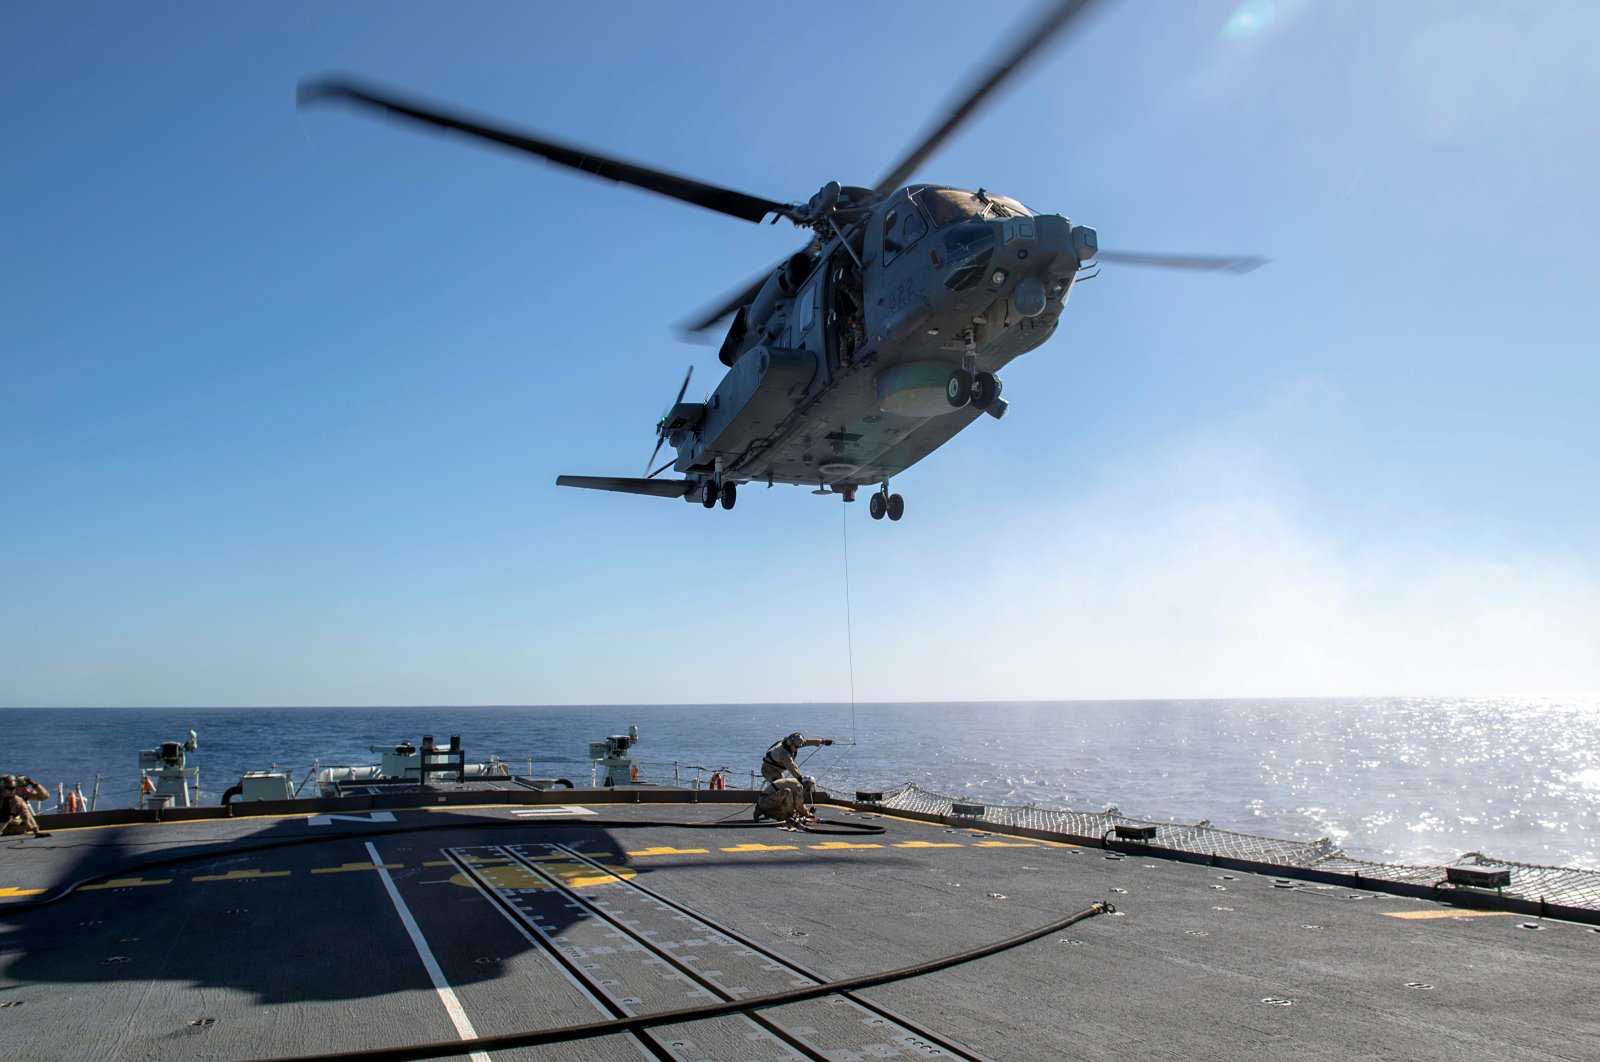 Air detachment members aboard HMCS Fredericton attach a fueling hose on the hoist cable of a CH-148 Cyclone helicopter during Operation Reassurance at sea Feb. 15, 2020, in this picture obtained from social media. (REUTERS Photo)